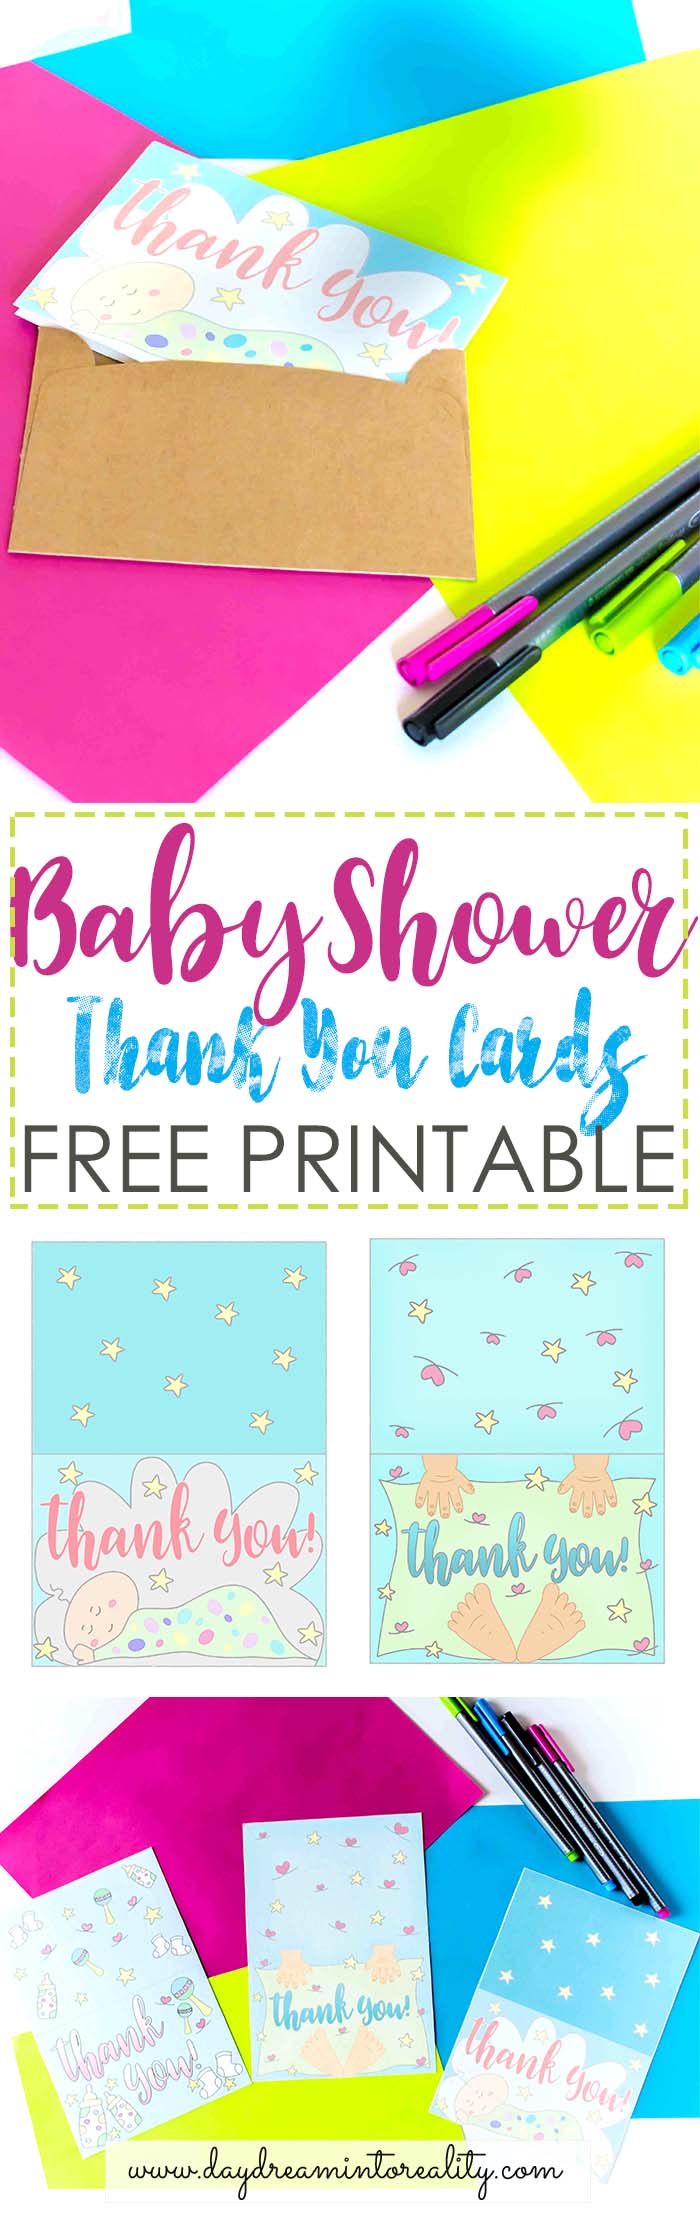 baby-shower-thank-you-cards-free-printable-daydream-into-reality